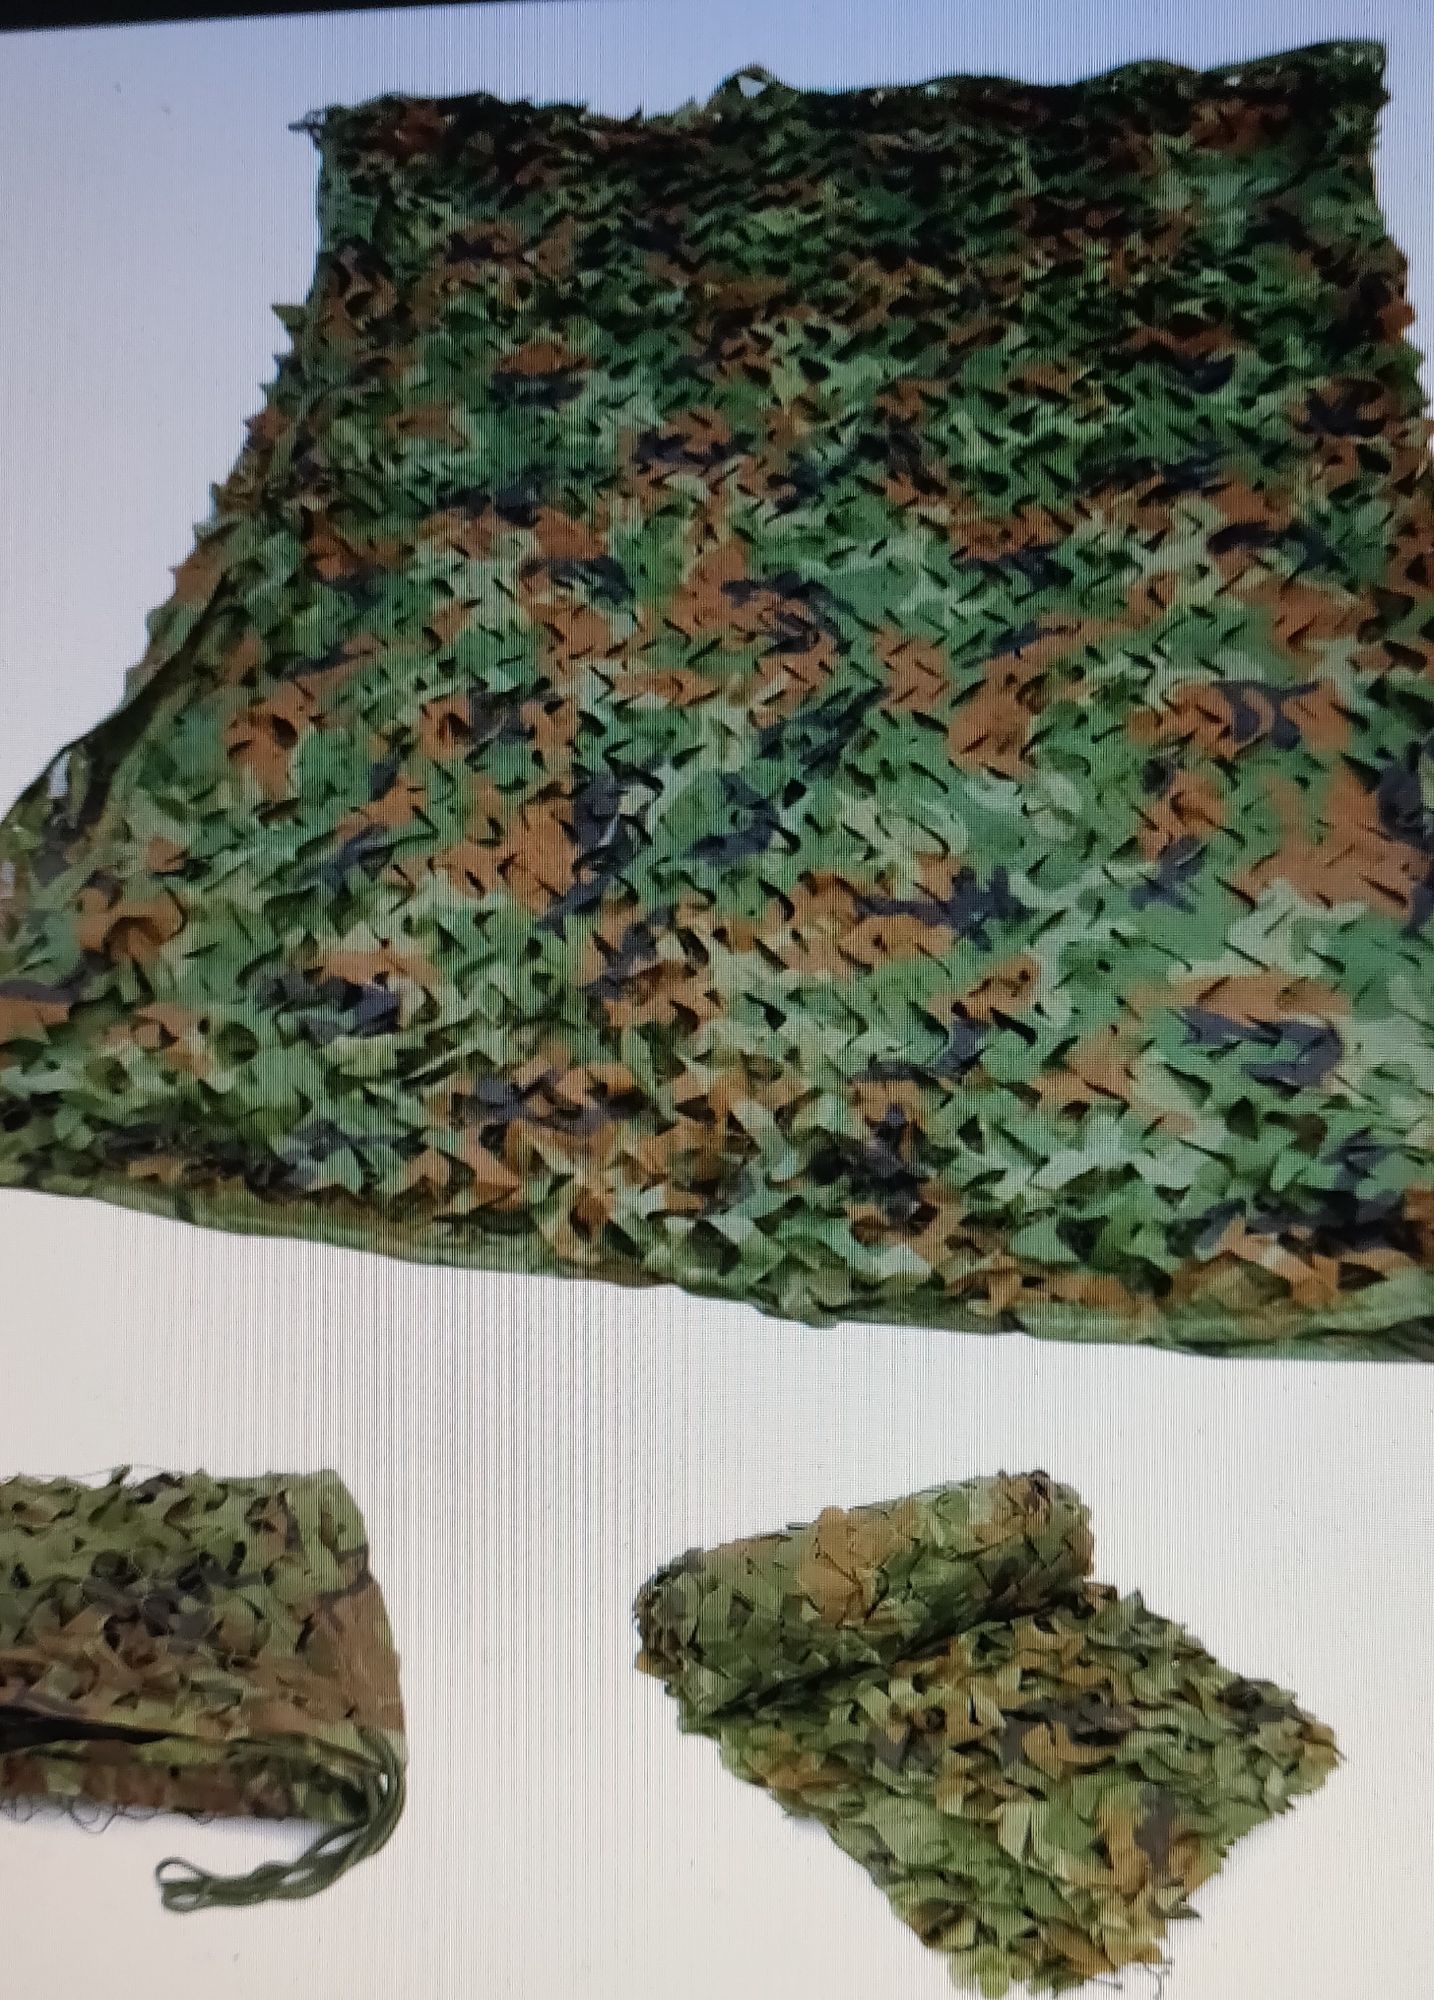 Fabric needed for camoflage nets